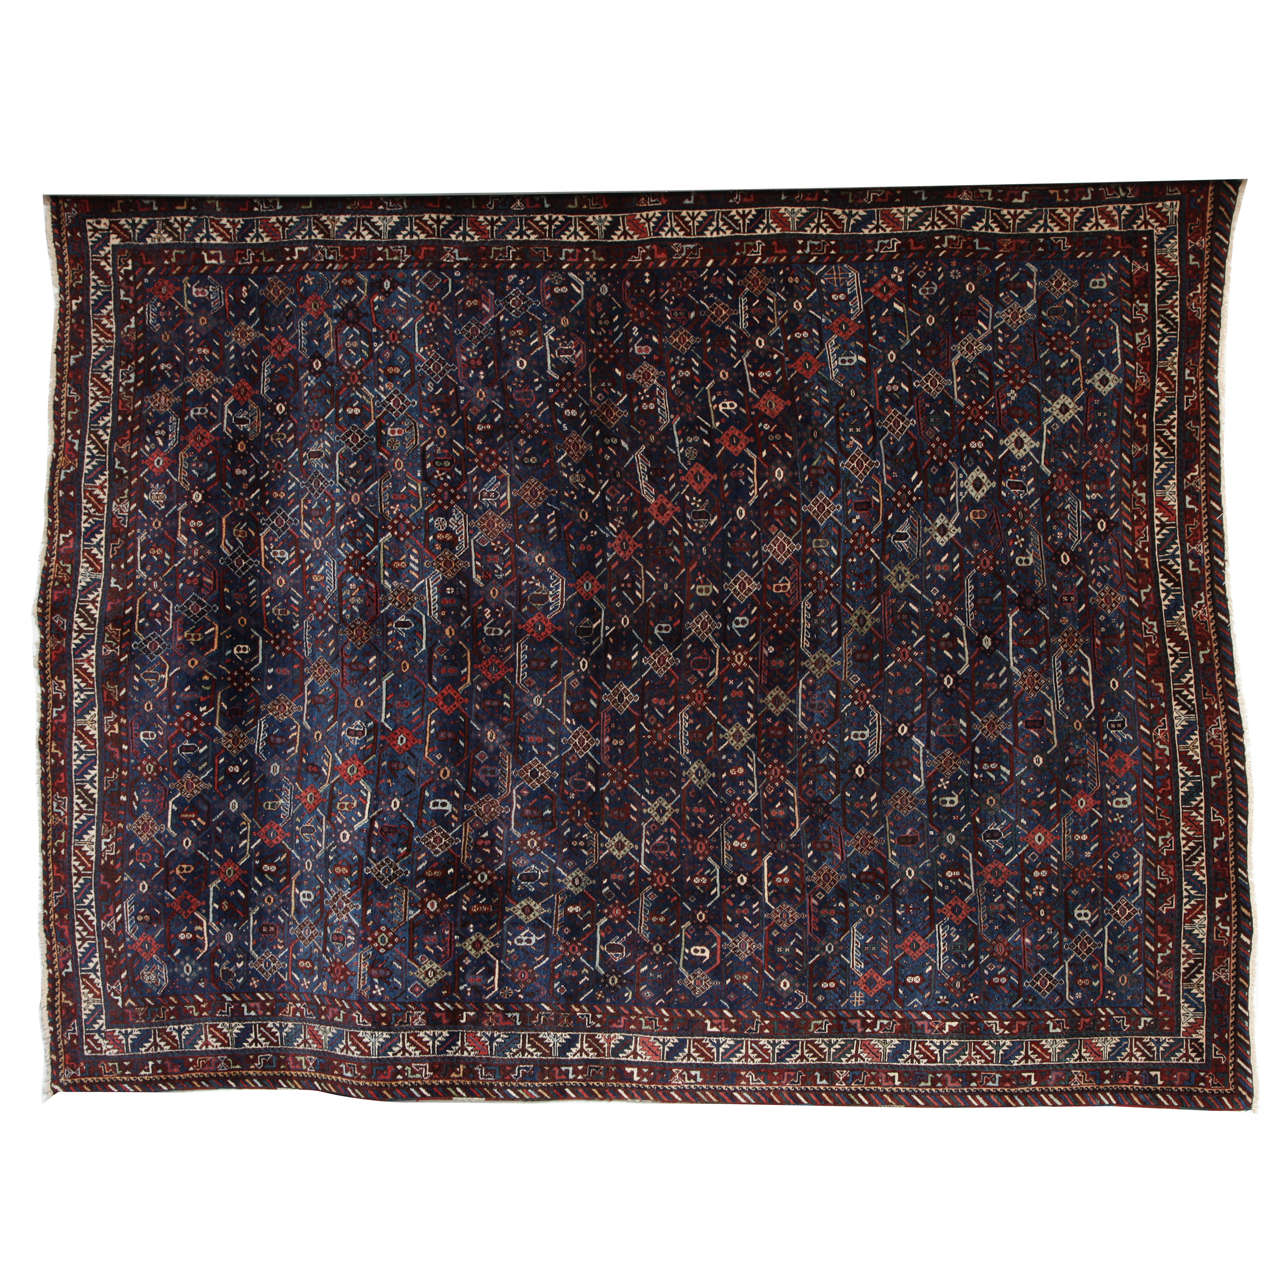 Antique 1880s Persian Qashqai Rug, Wool, Hand-knotted, 7' x 9'